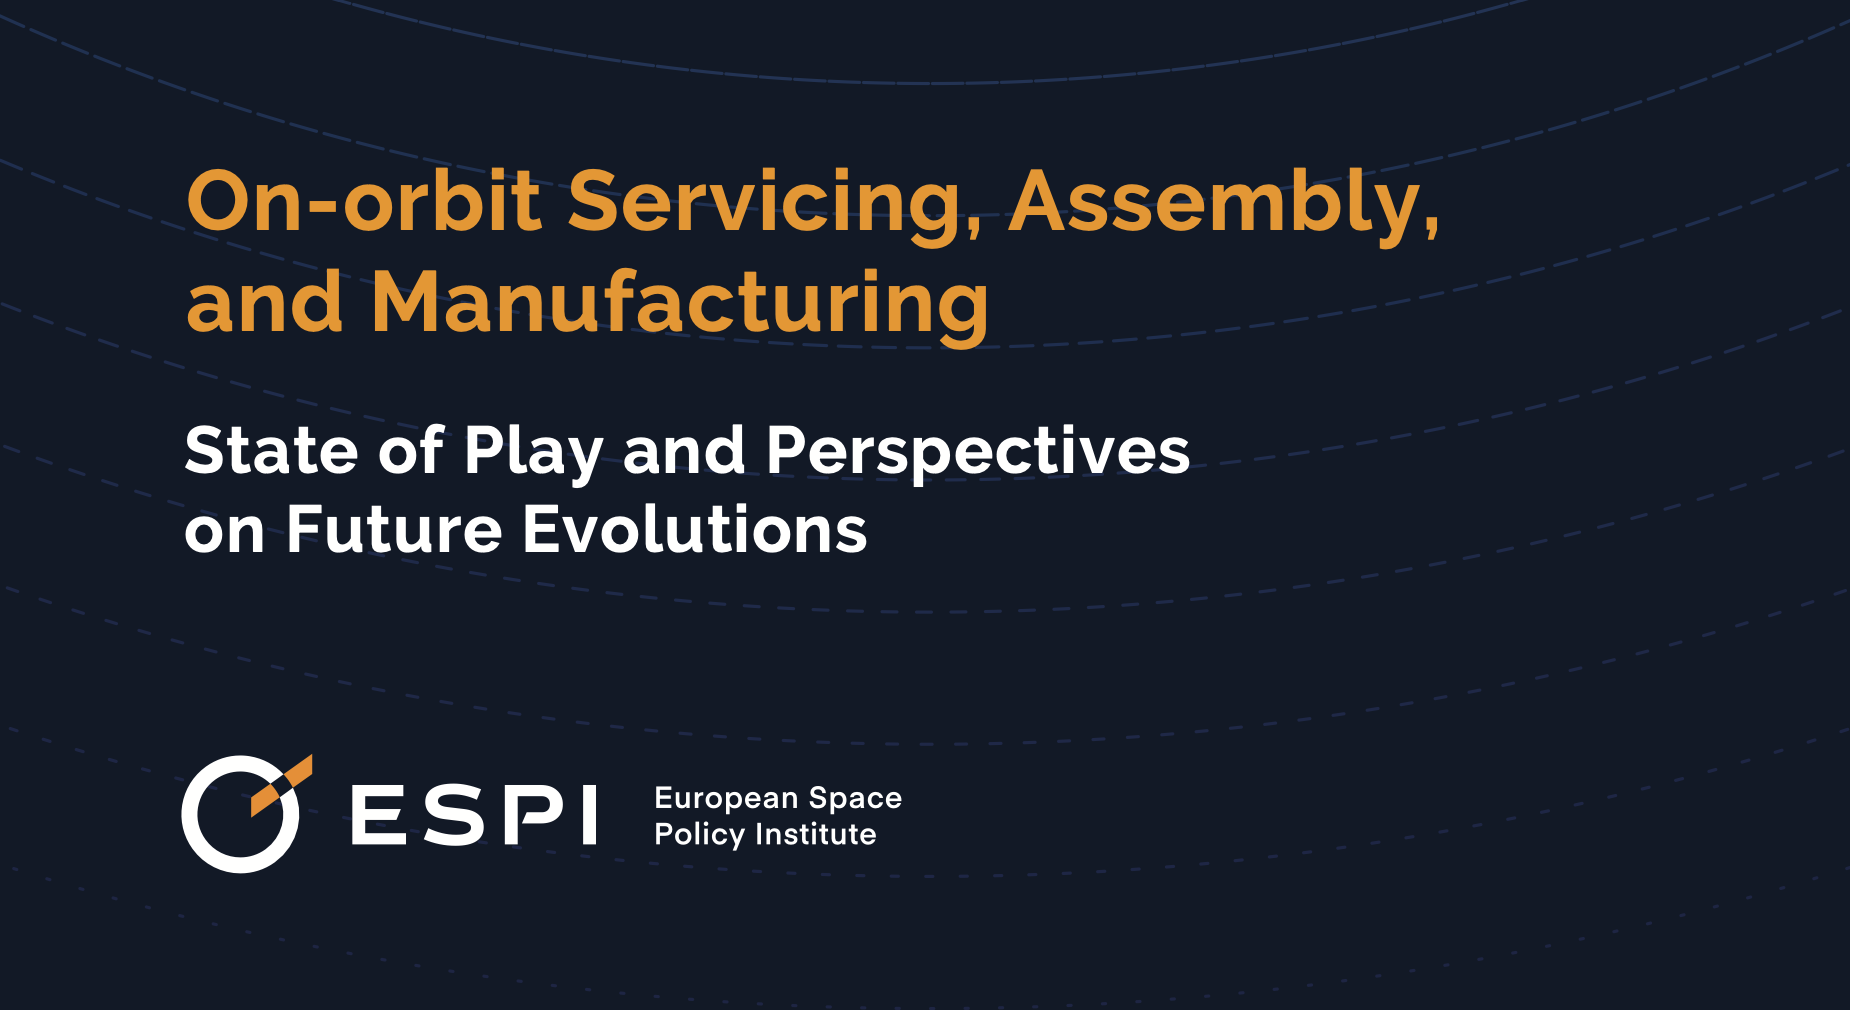 On-orbit Servicing, Assembly, and Manufacturing - State of Play and Perspectives on Future Evolutions